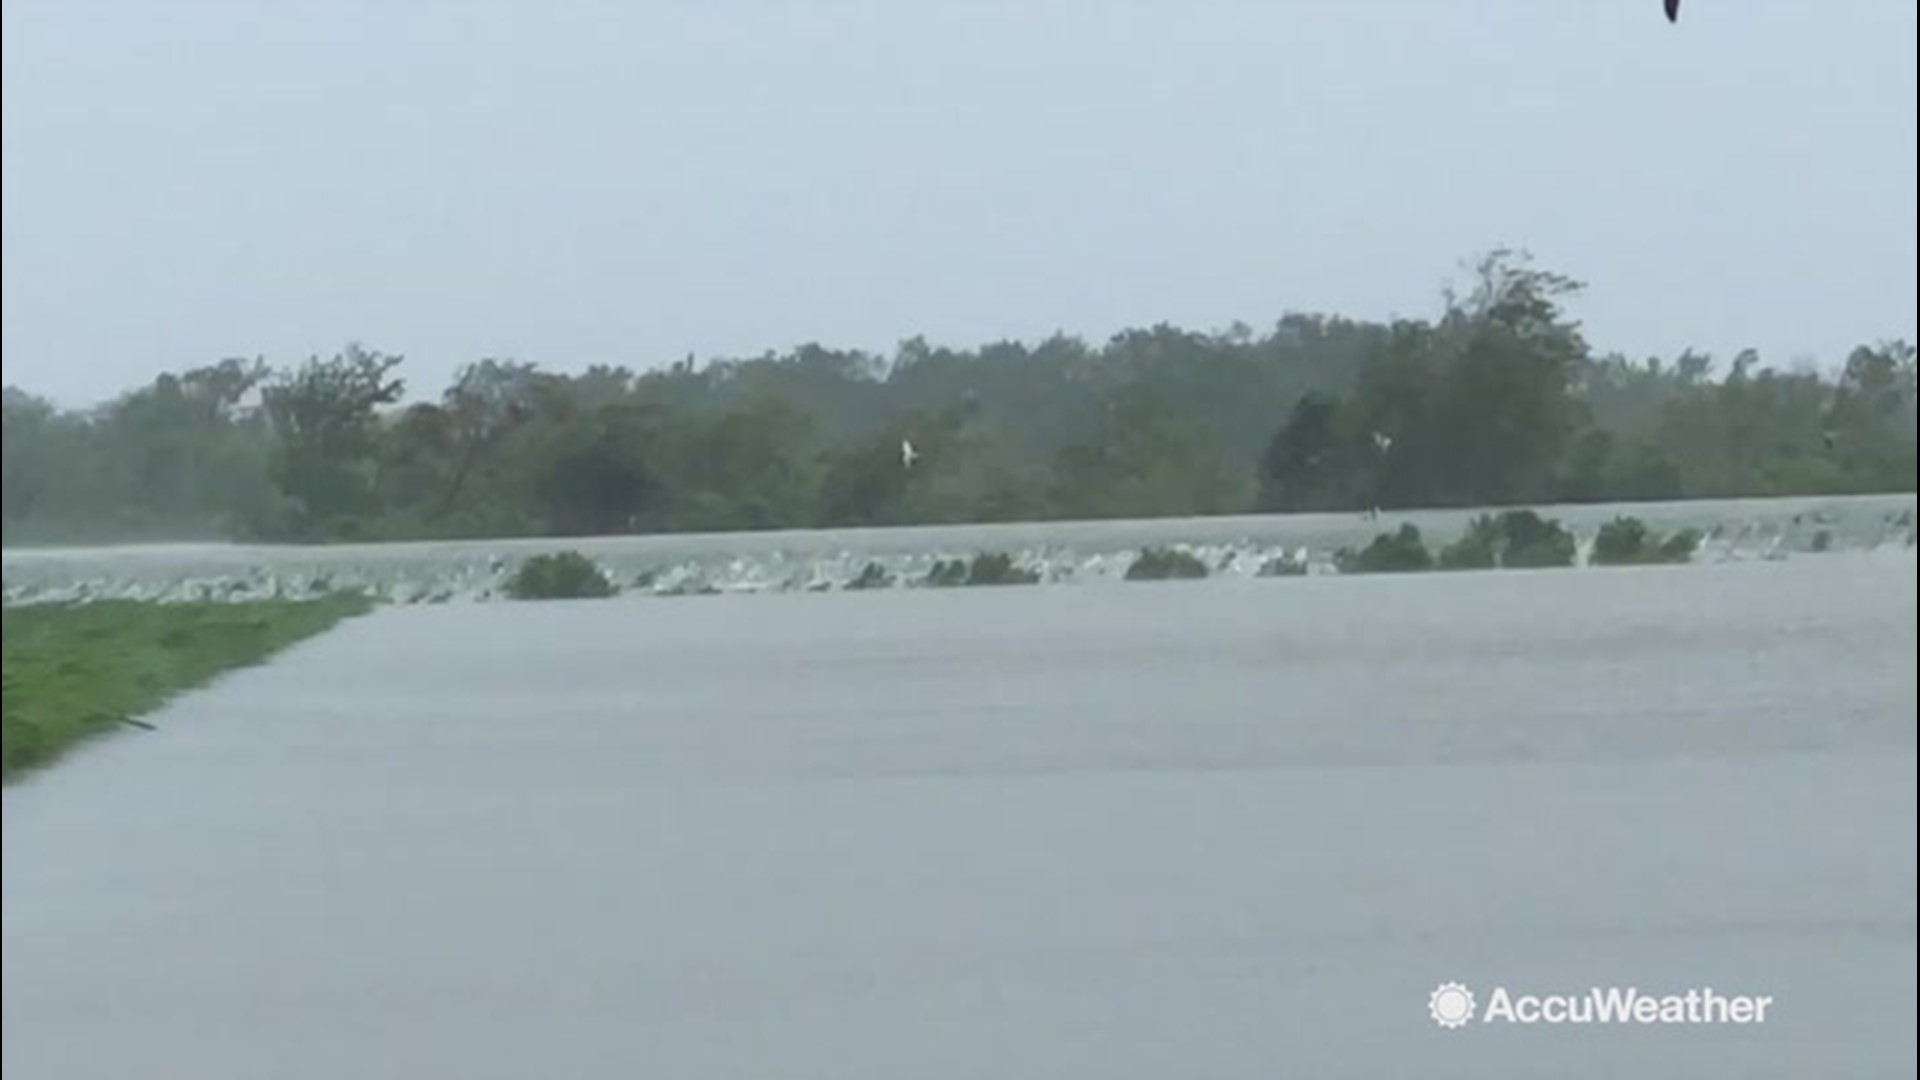 This levee in St. Mary's Parish, Louisiana was breached in the midst of Hurricane Barry on July 13.  Flooding remains a threat in the area.